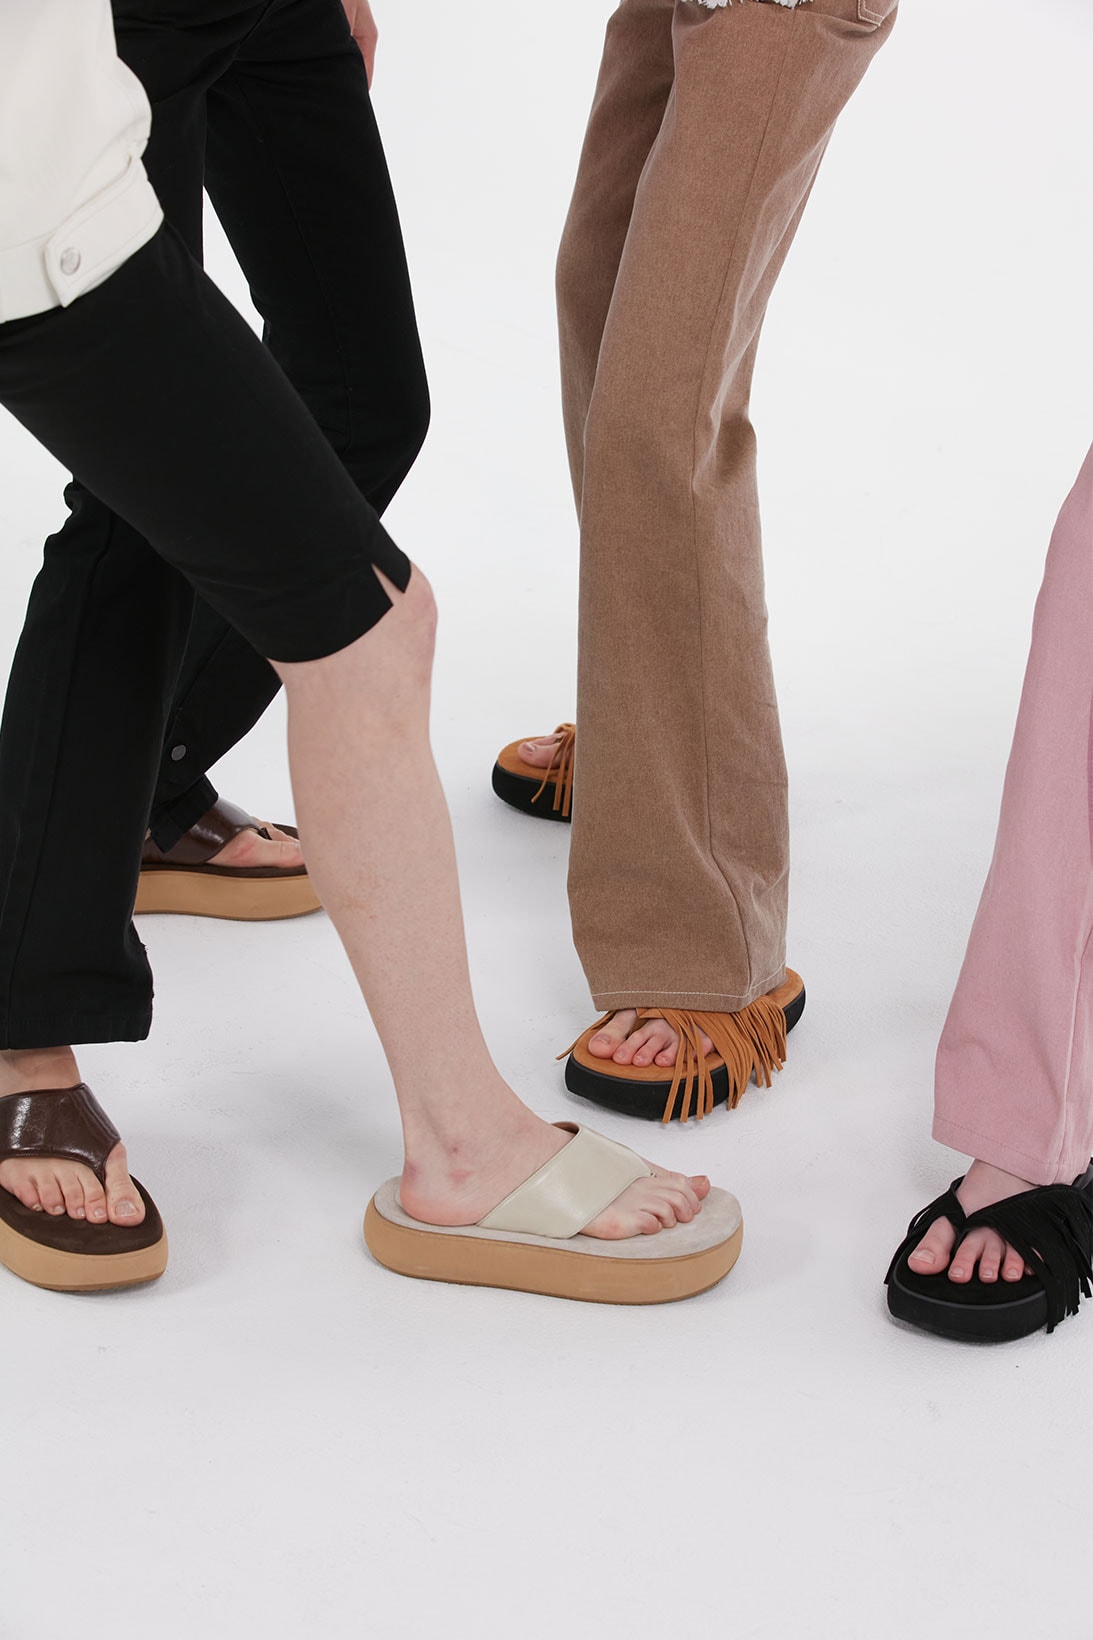 osoi spring summer ss21 collection campaign hustle and bustle sandals shoes slides